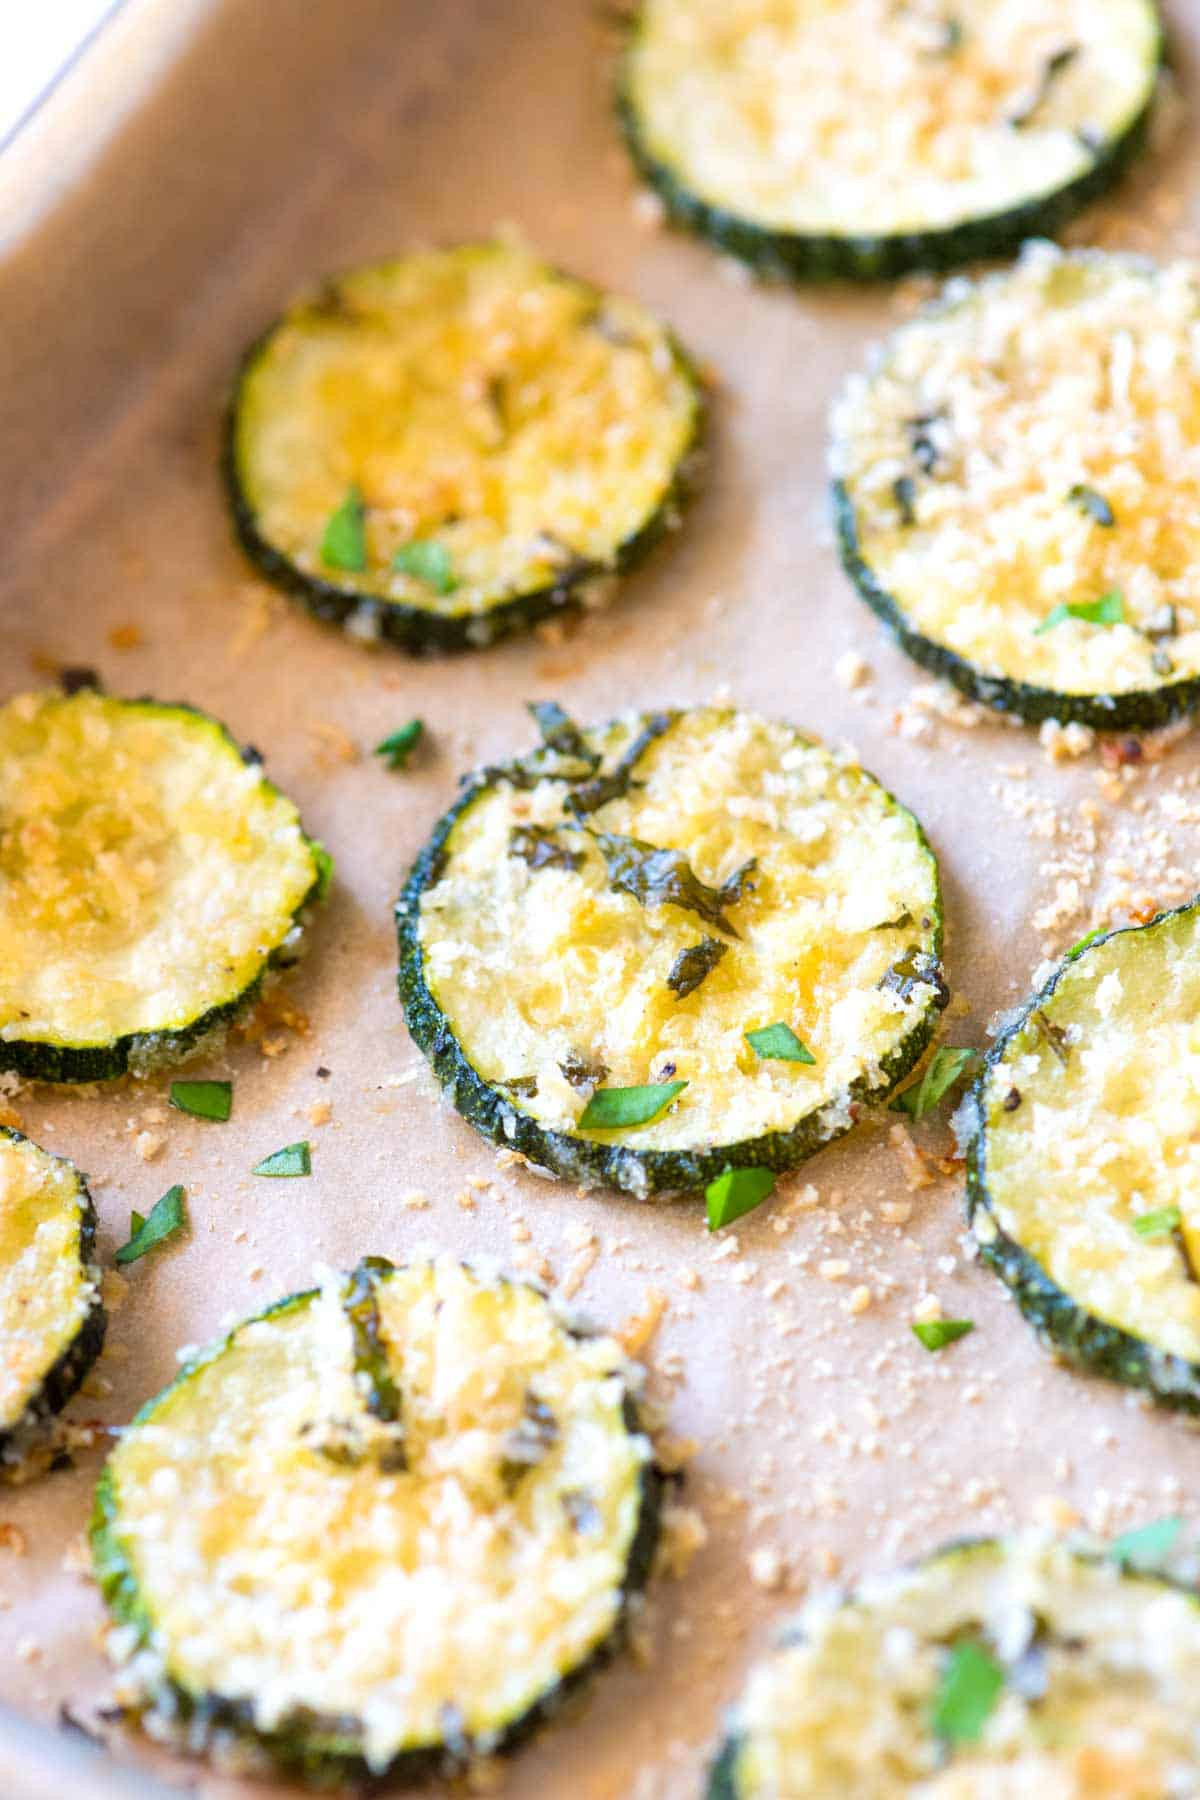 Baked Zucchini Recipes Healthy
 Parmesan Basil Baked Zucchini Chips Recipe